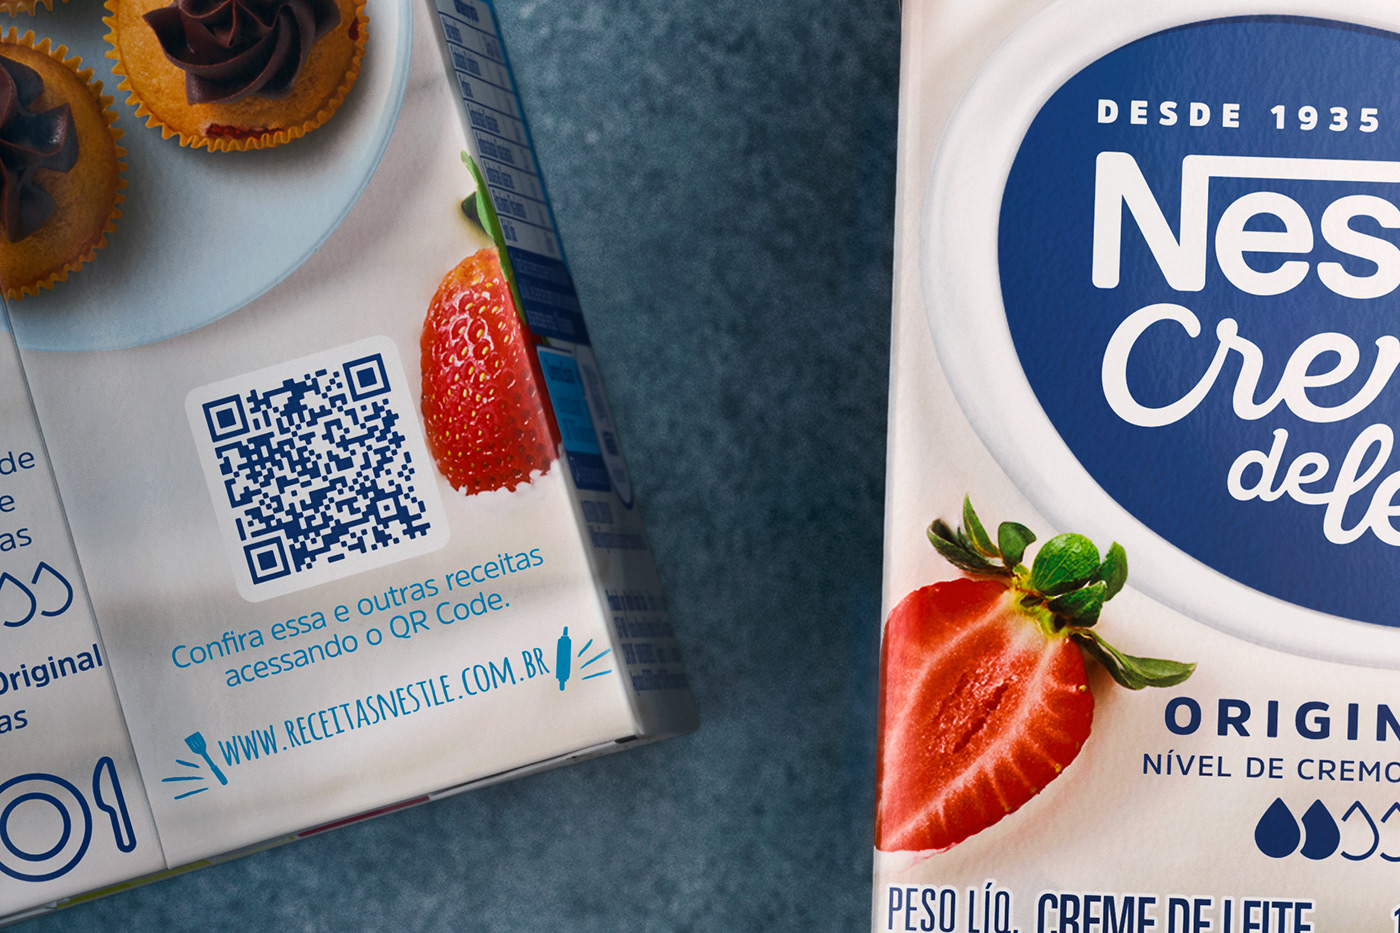 Detail of two milk cream packages